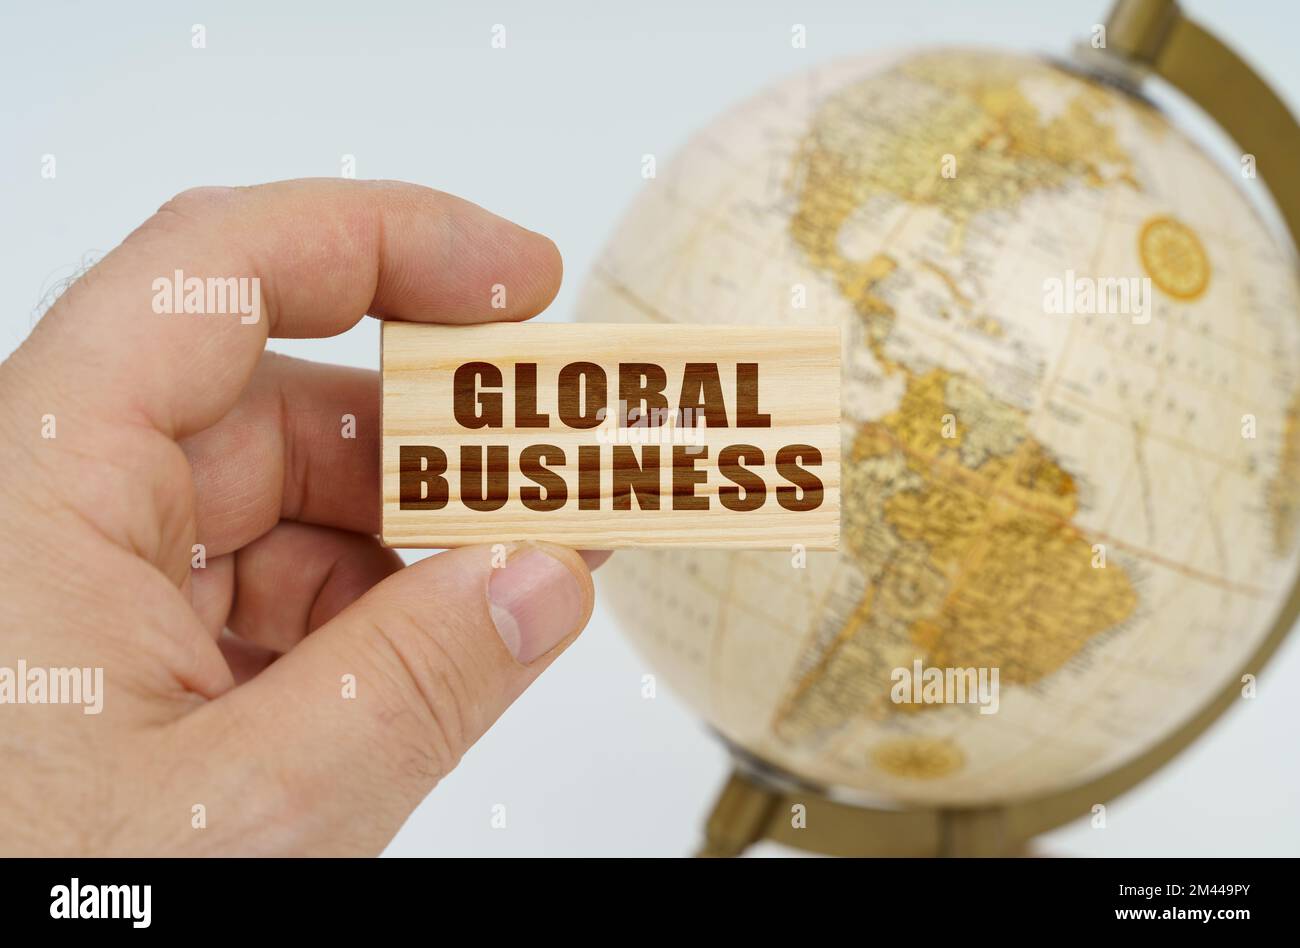 Globalization concept. A man holds in his hand a wooden plate on which it is written - GLOBAL BUSINESS. In the background is a globe. Stock Photo